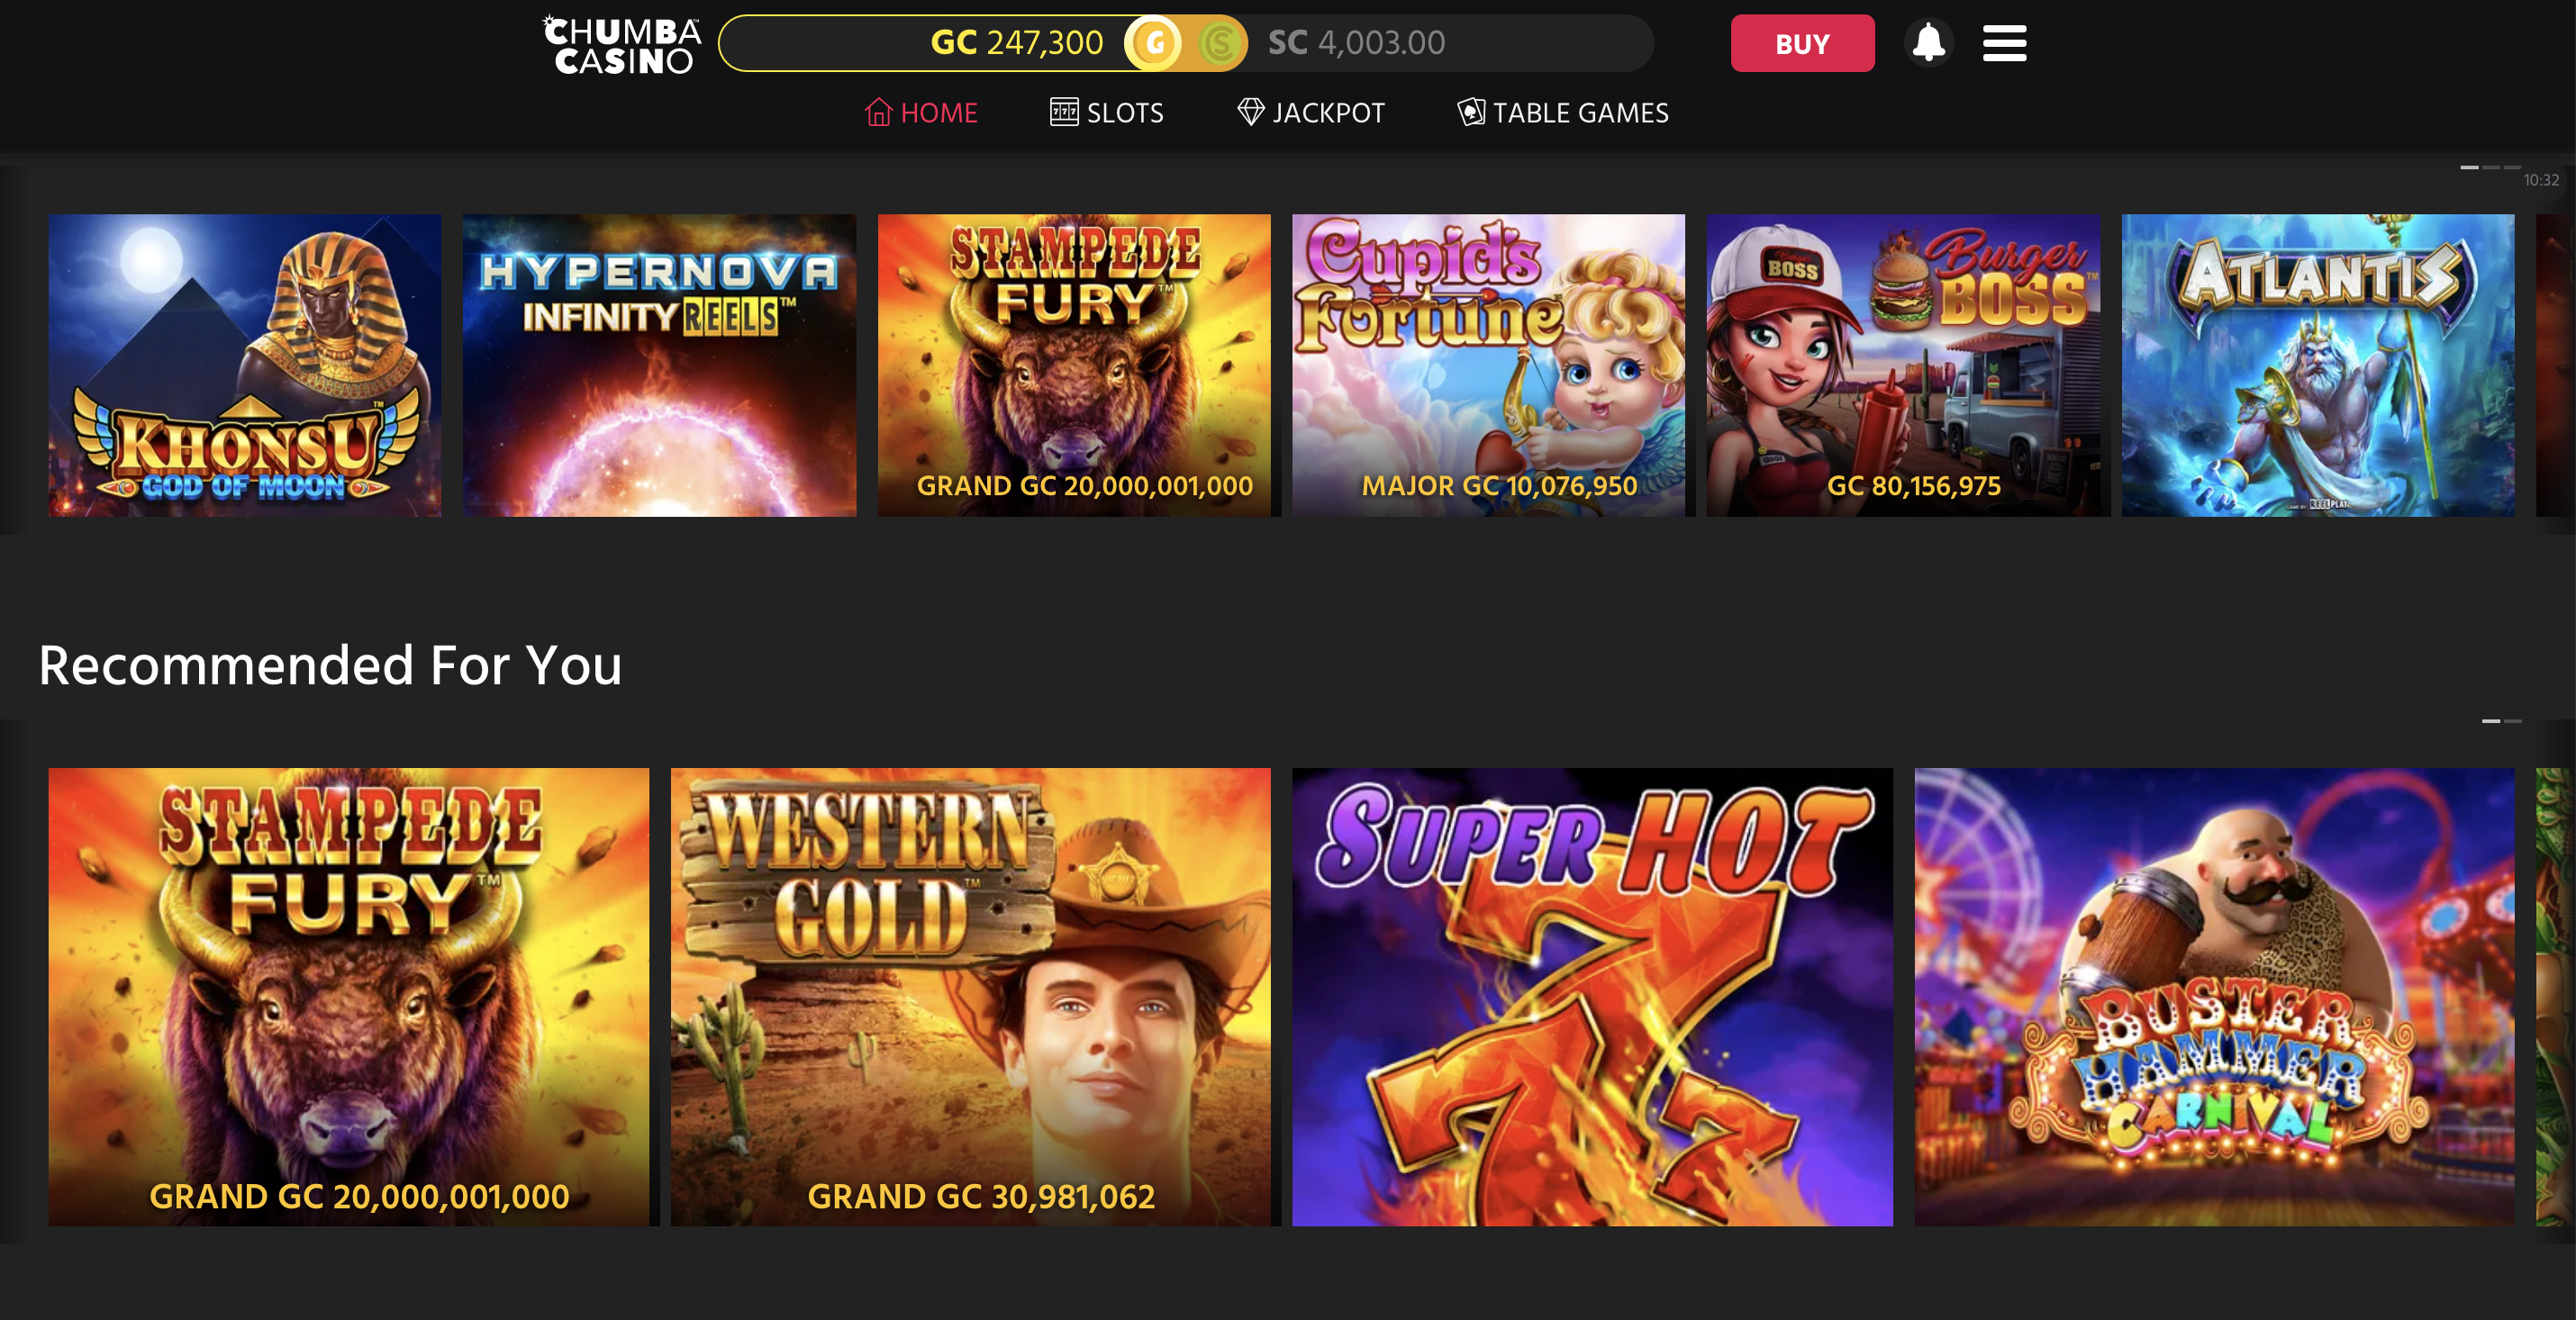 chumba-casino-recommended-games.png